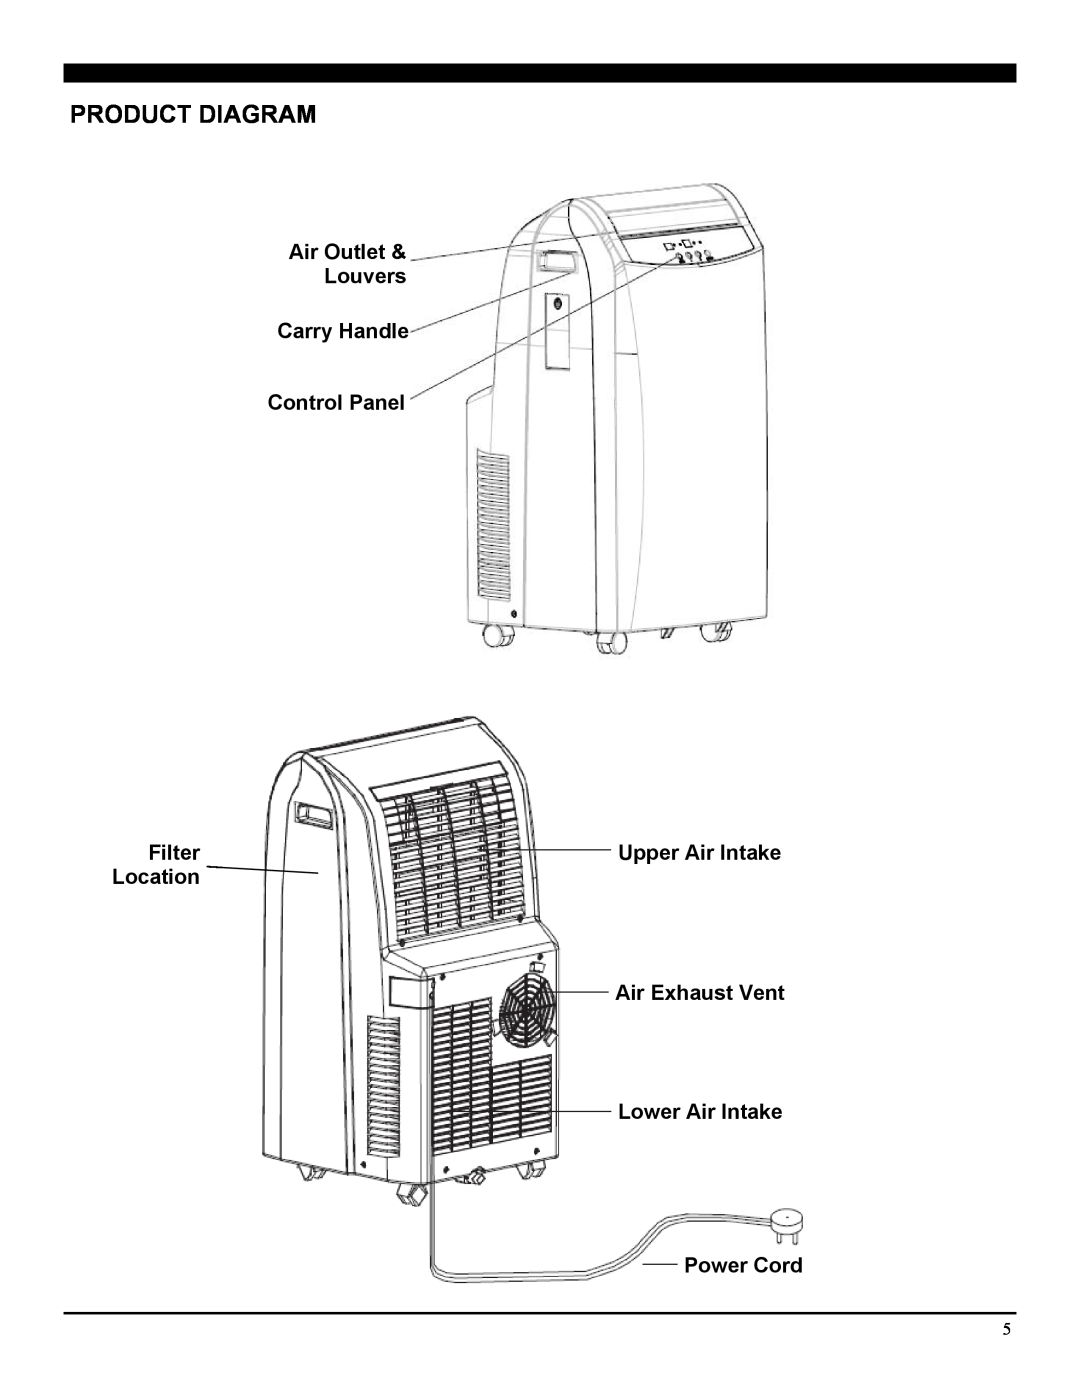 Soleus Air GH-PAC-12E1 Product Diagram, Air Outlet & Louvers Carry Handle Control Panel, Filter, Upper Air Intake 